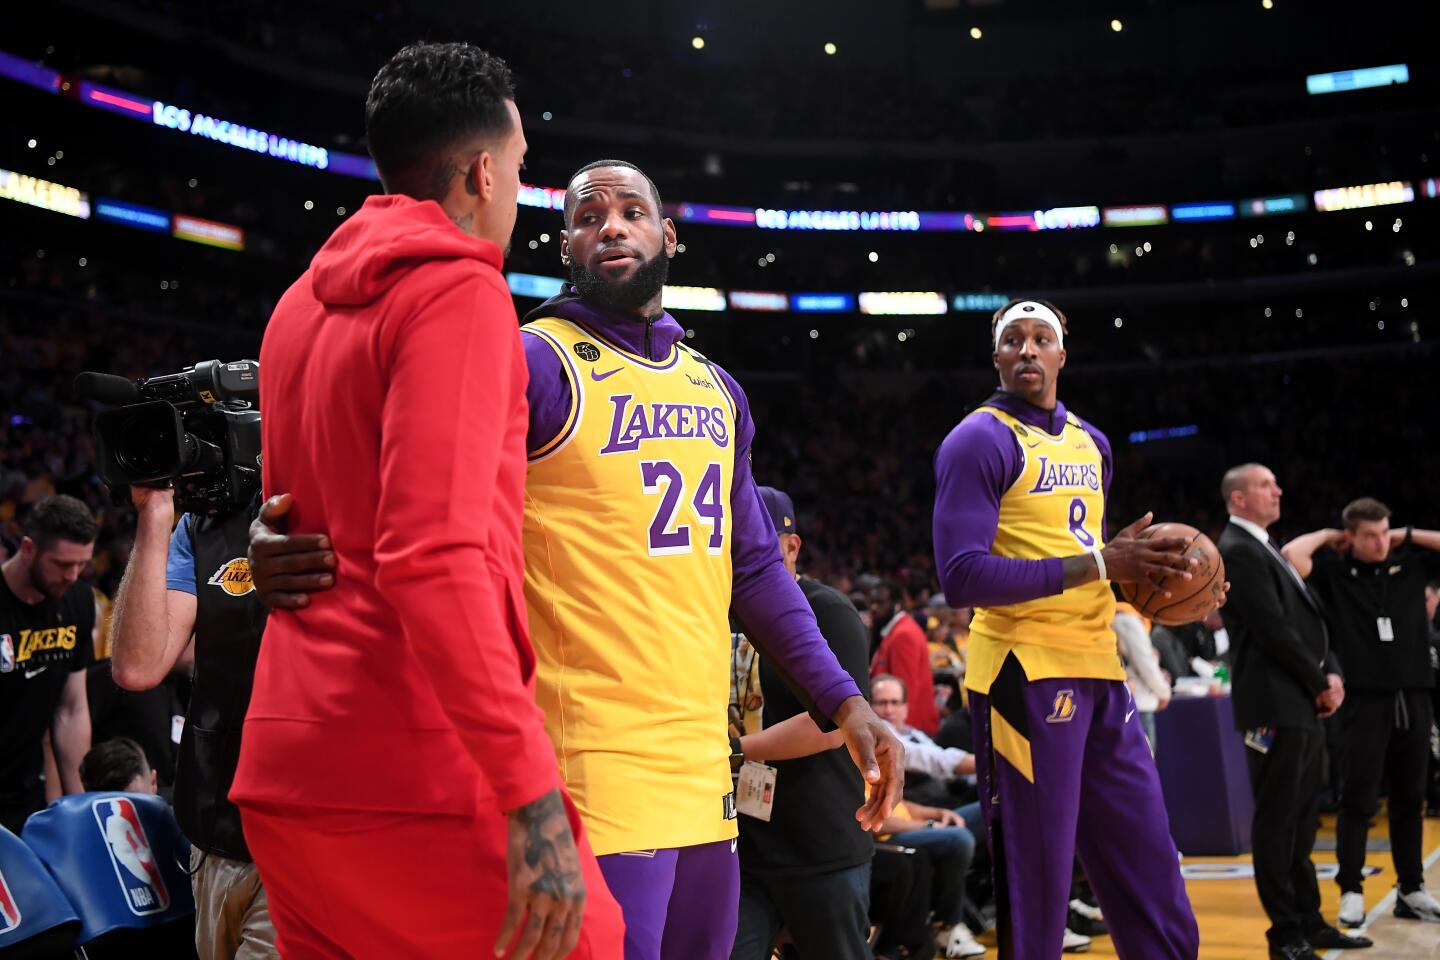 LeBron James greets Matt Barnes before a Lakers game against the Trail Blazers on Jan. 31 at Staples Center.